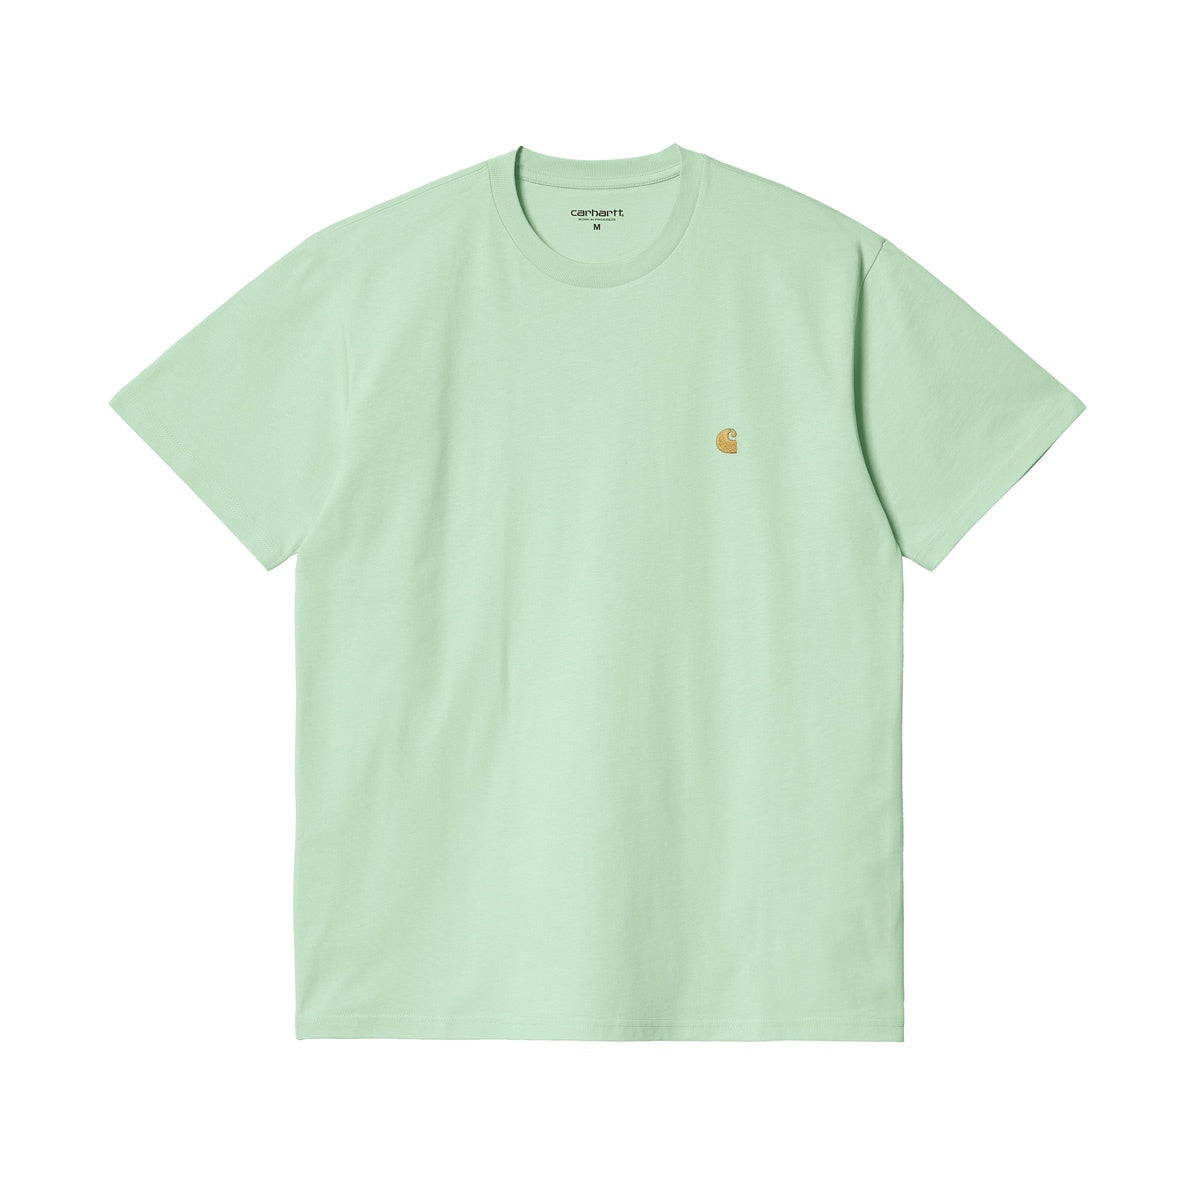 Carhartt WIP SS Chase T Shirt Pale Spearmint Gold